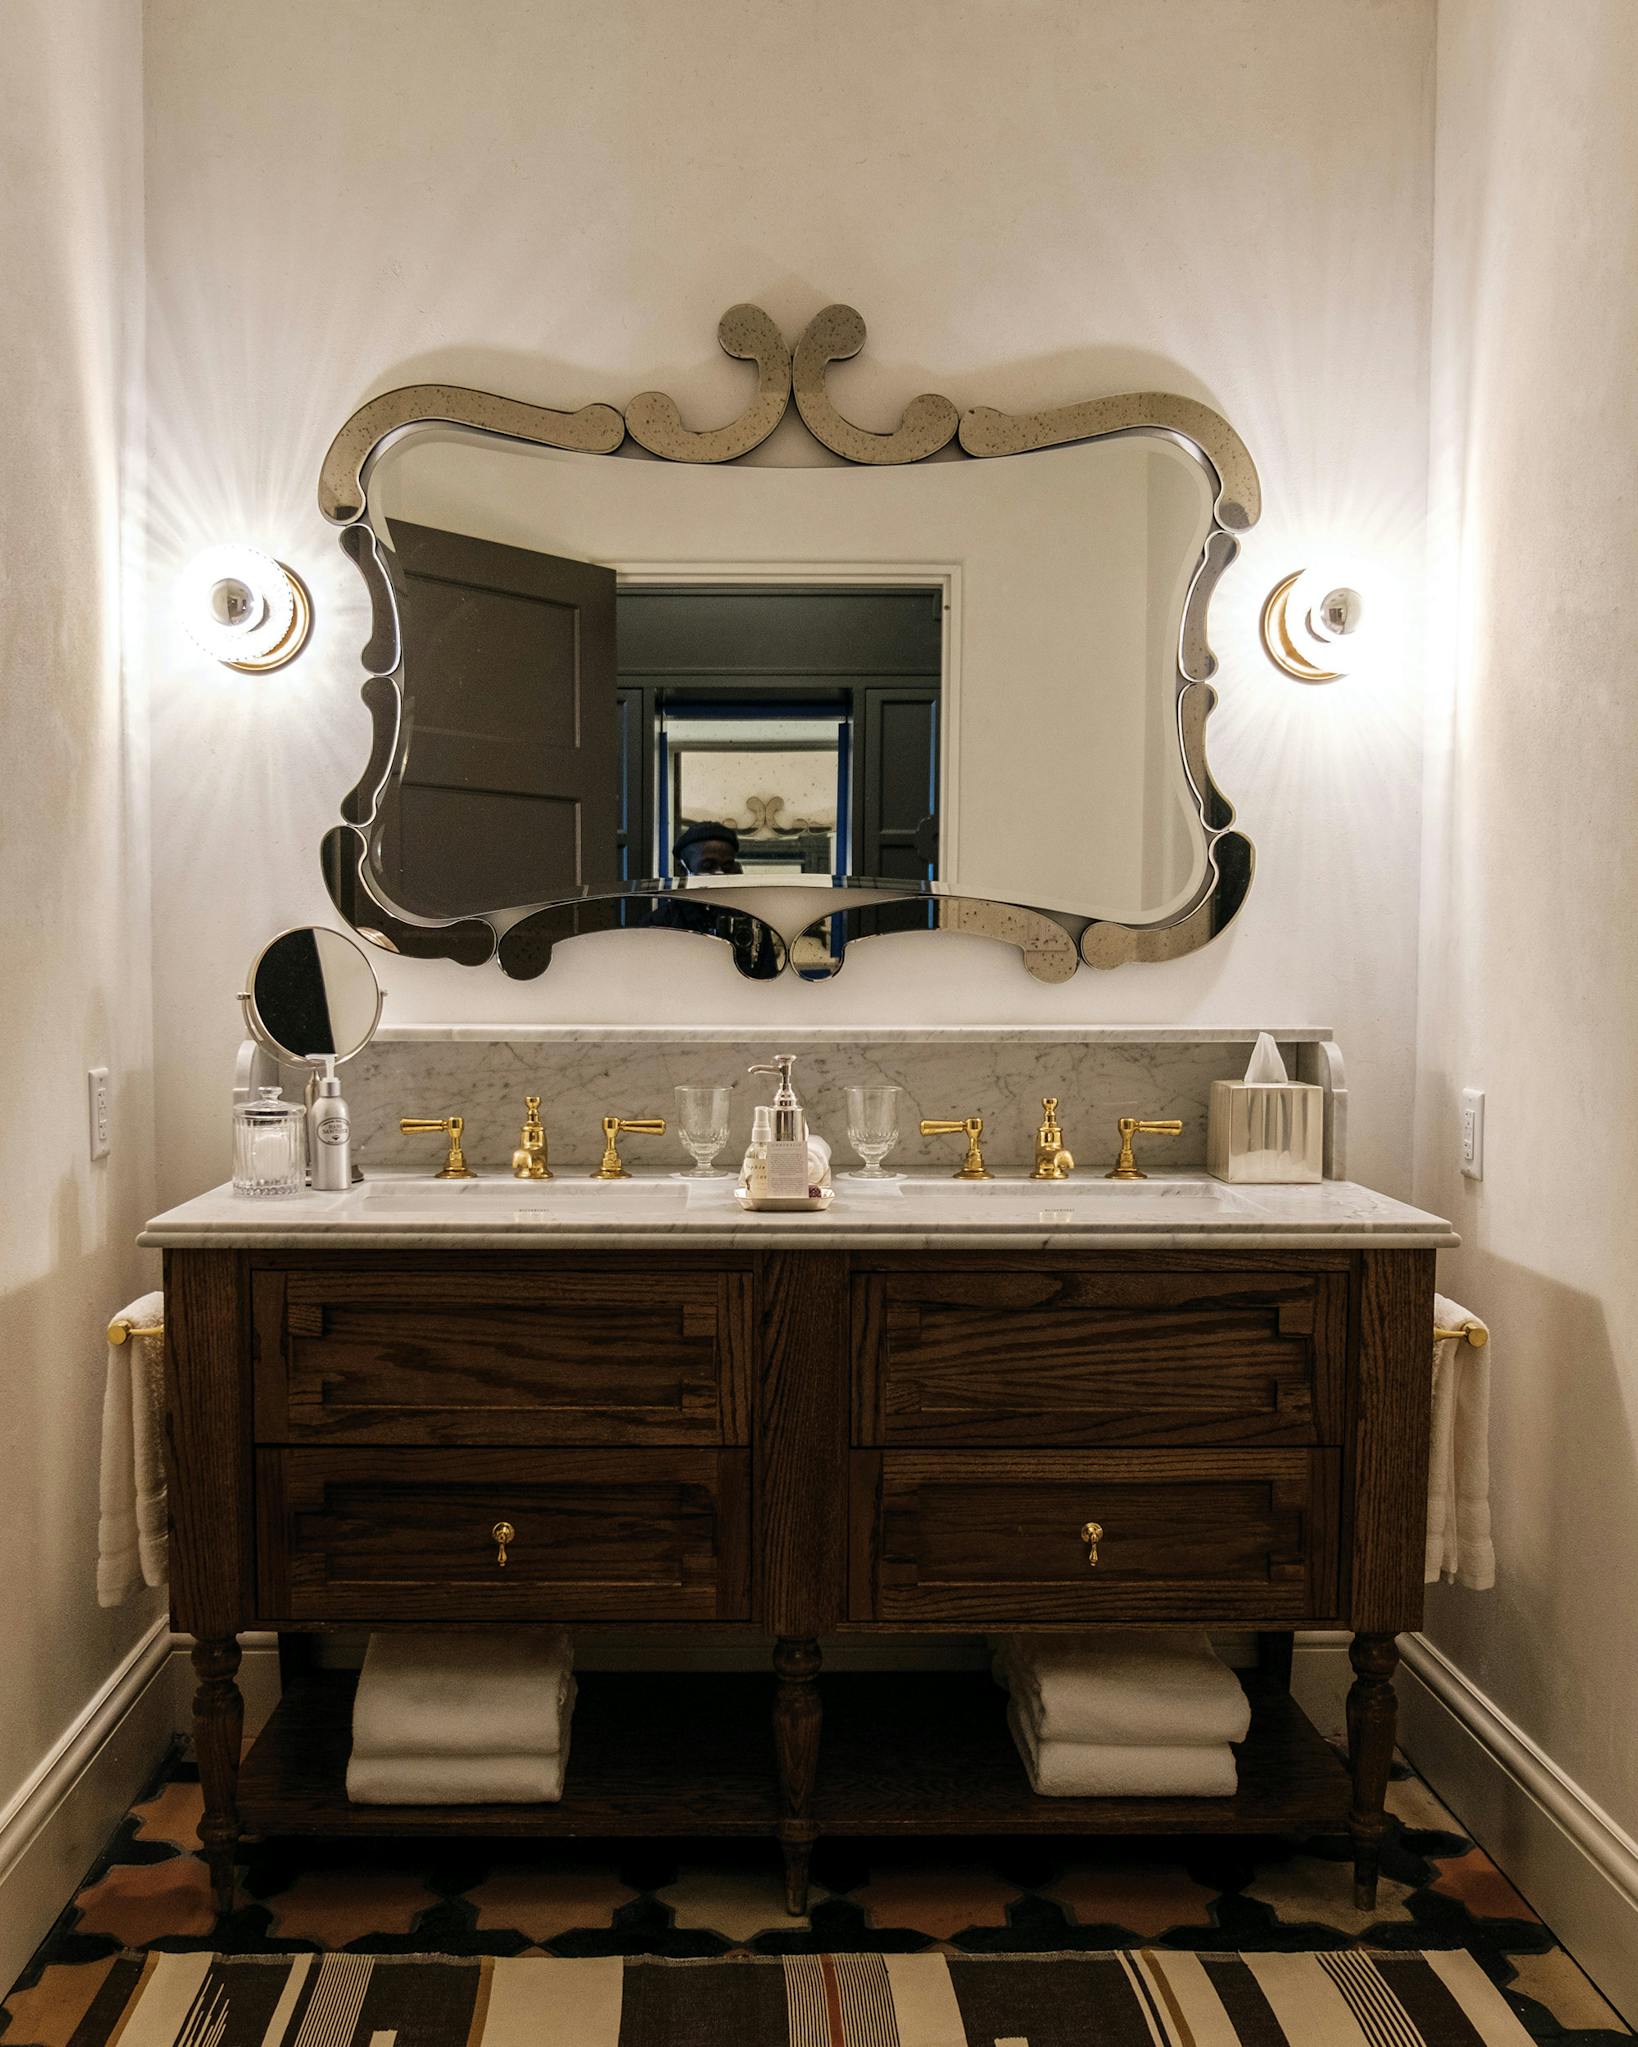 Ornate mirror and vanity in a bathroom at Commodore Perry.